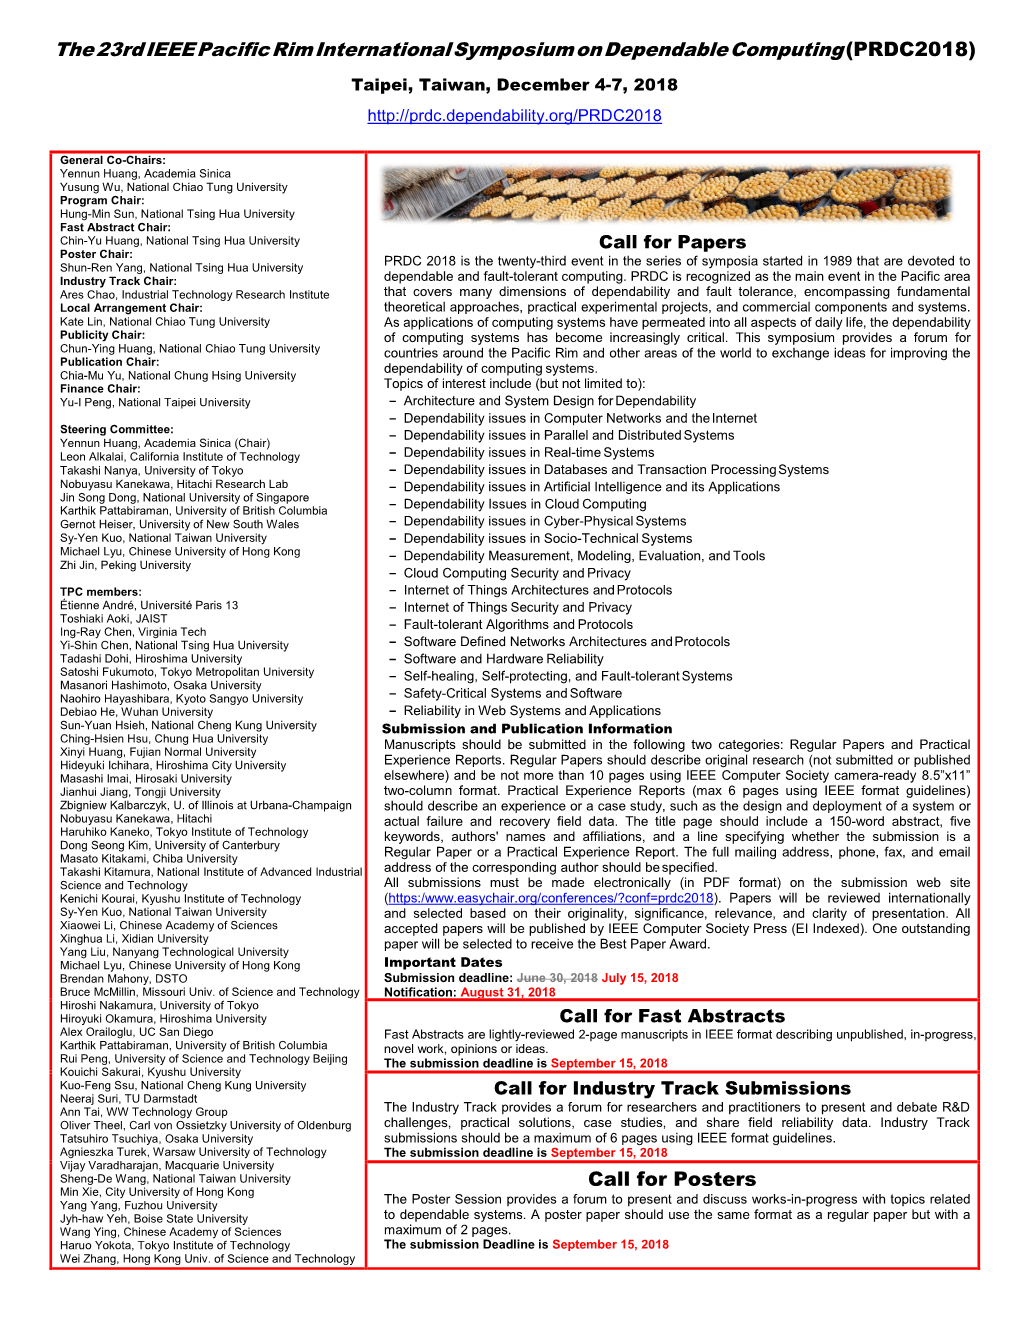 The 23Rd IEEE Pacific Rim International Symposium on Dependable Computing (PRDC2018) Call for Posters